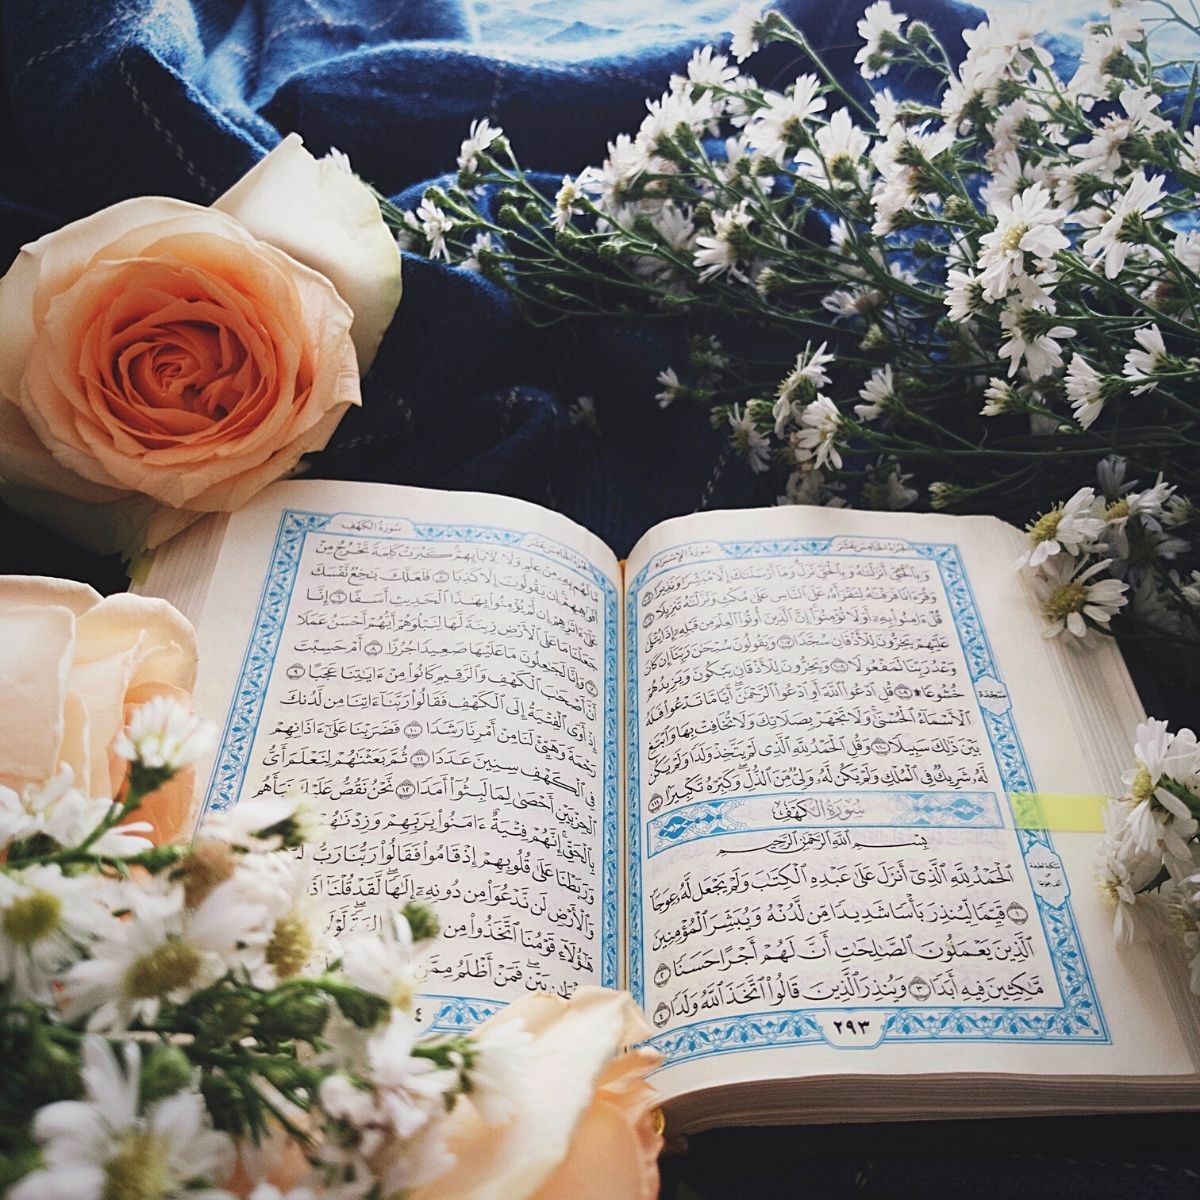 Flowers of the Quran